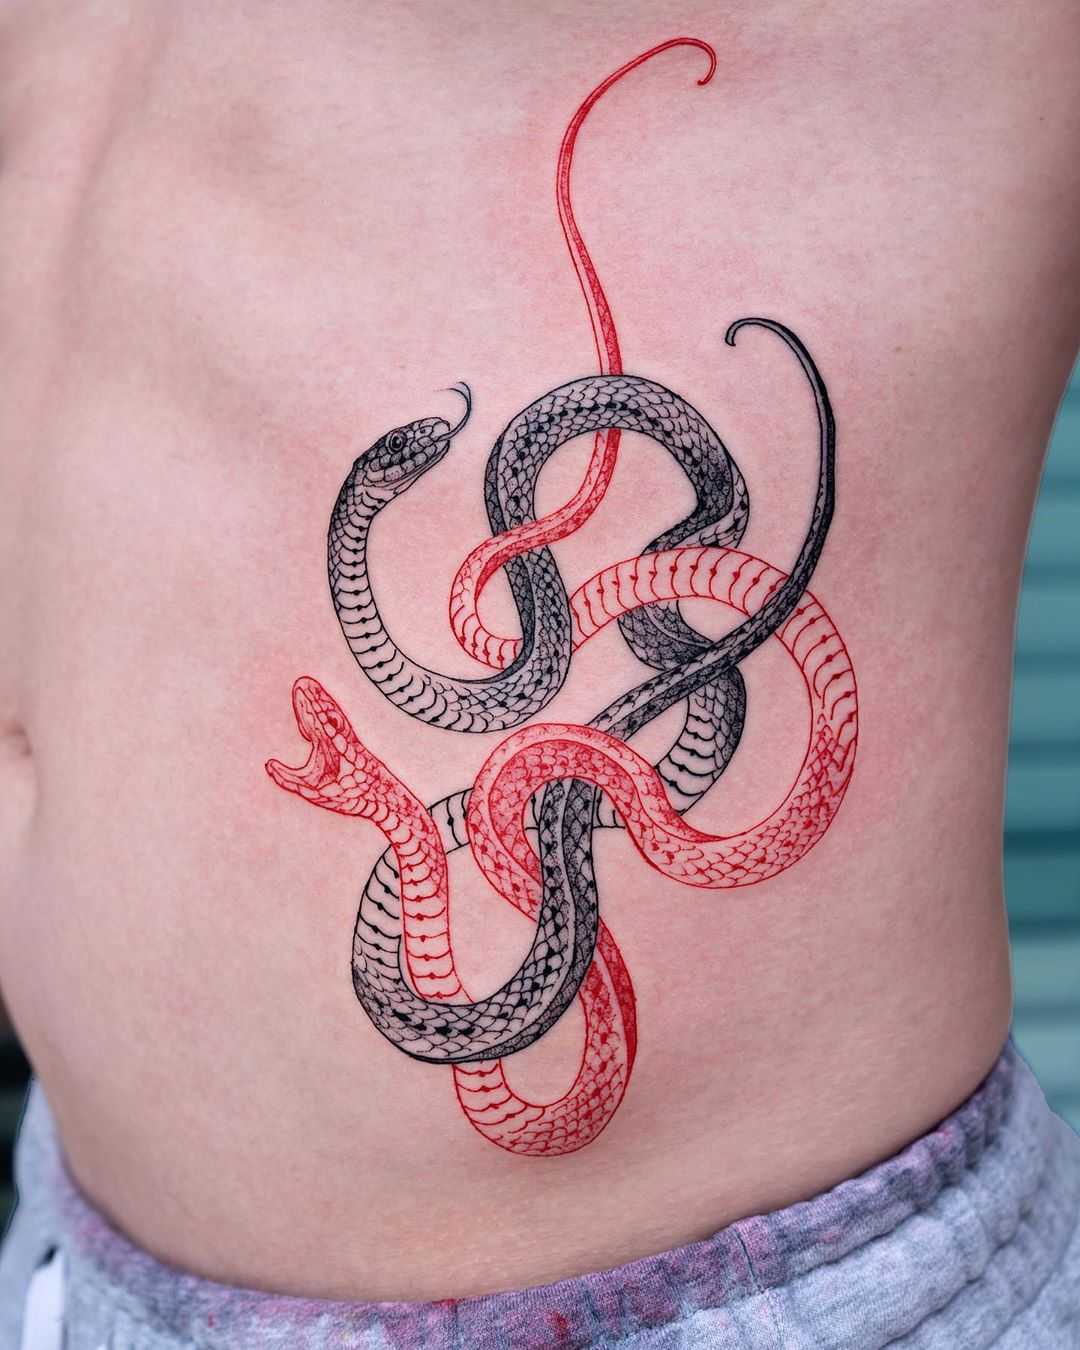 Black and red snakes by tattooist Oozy